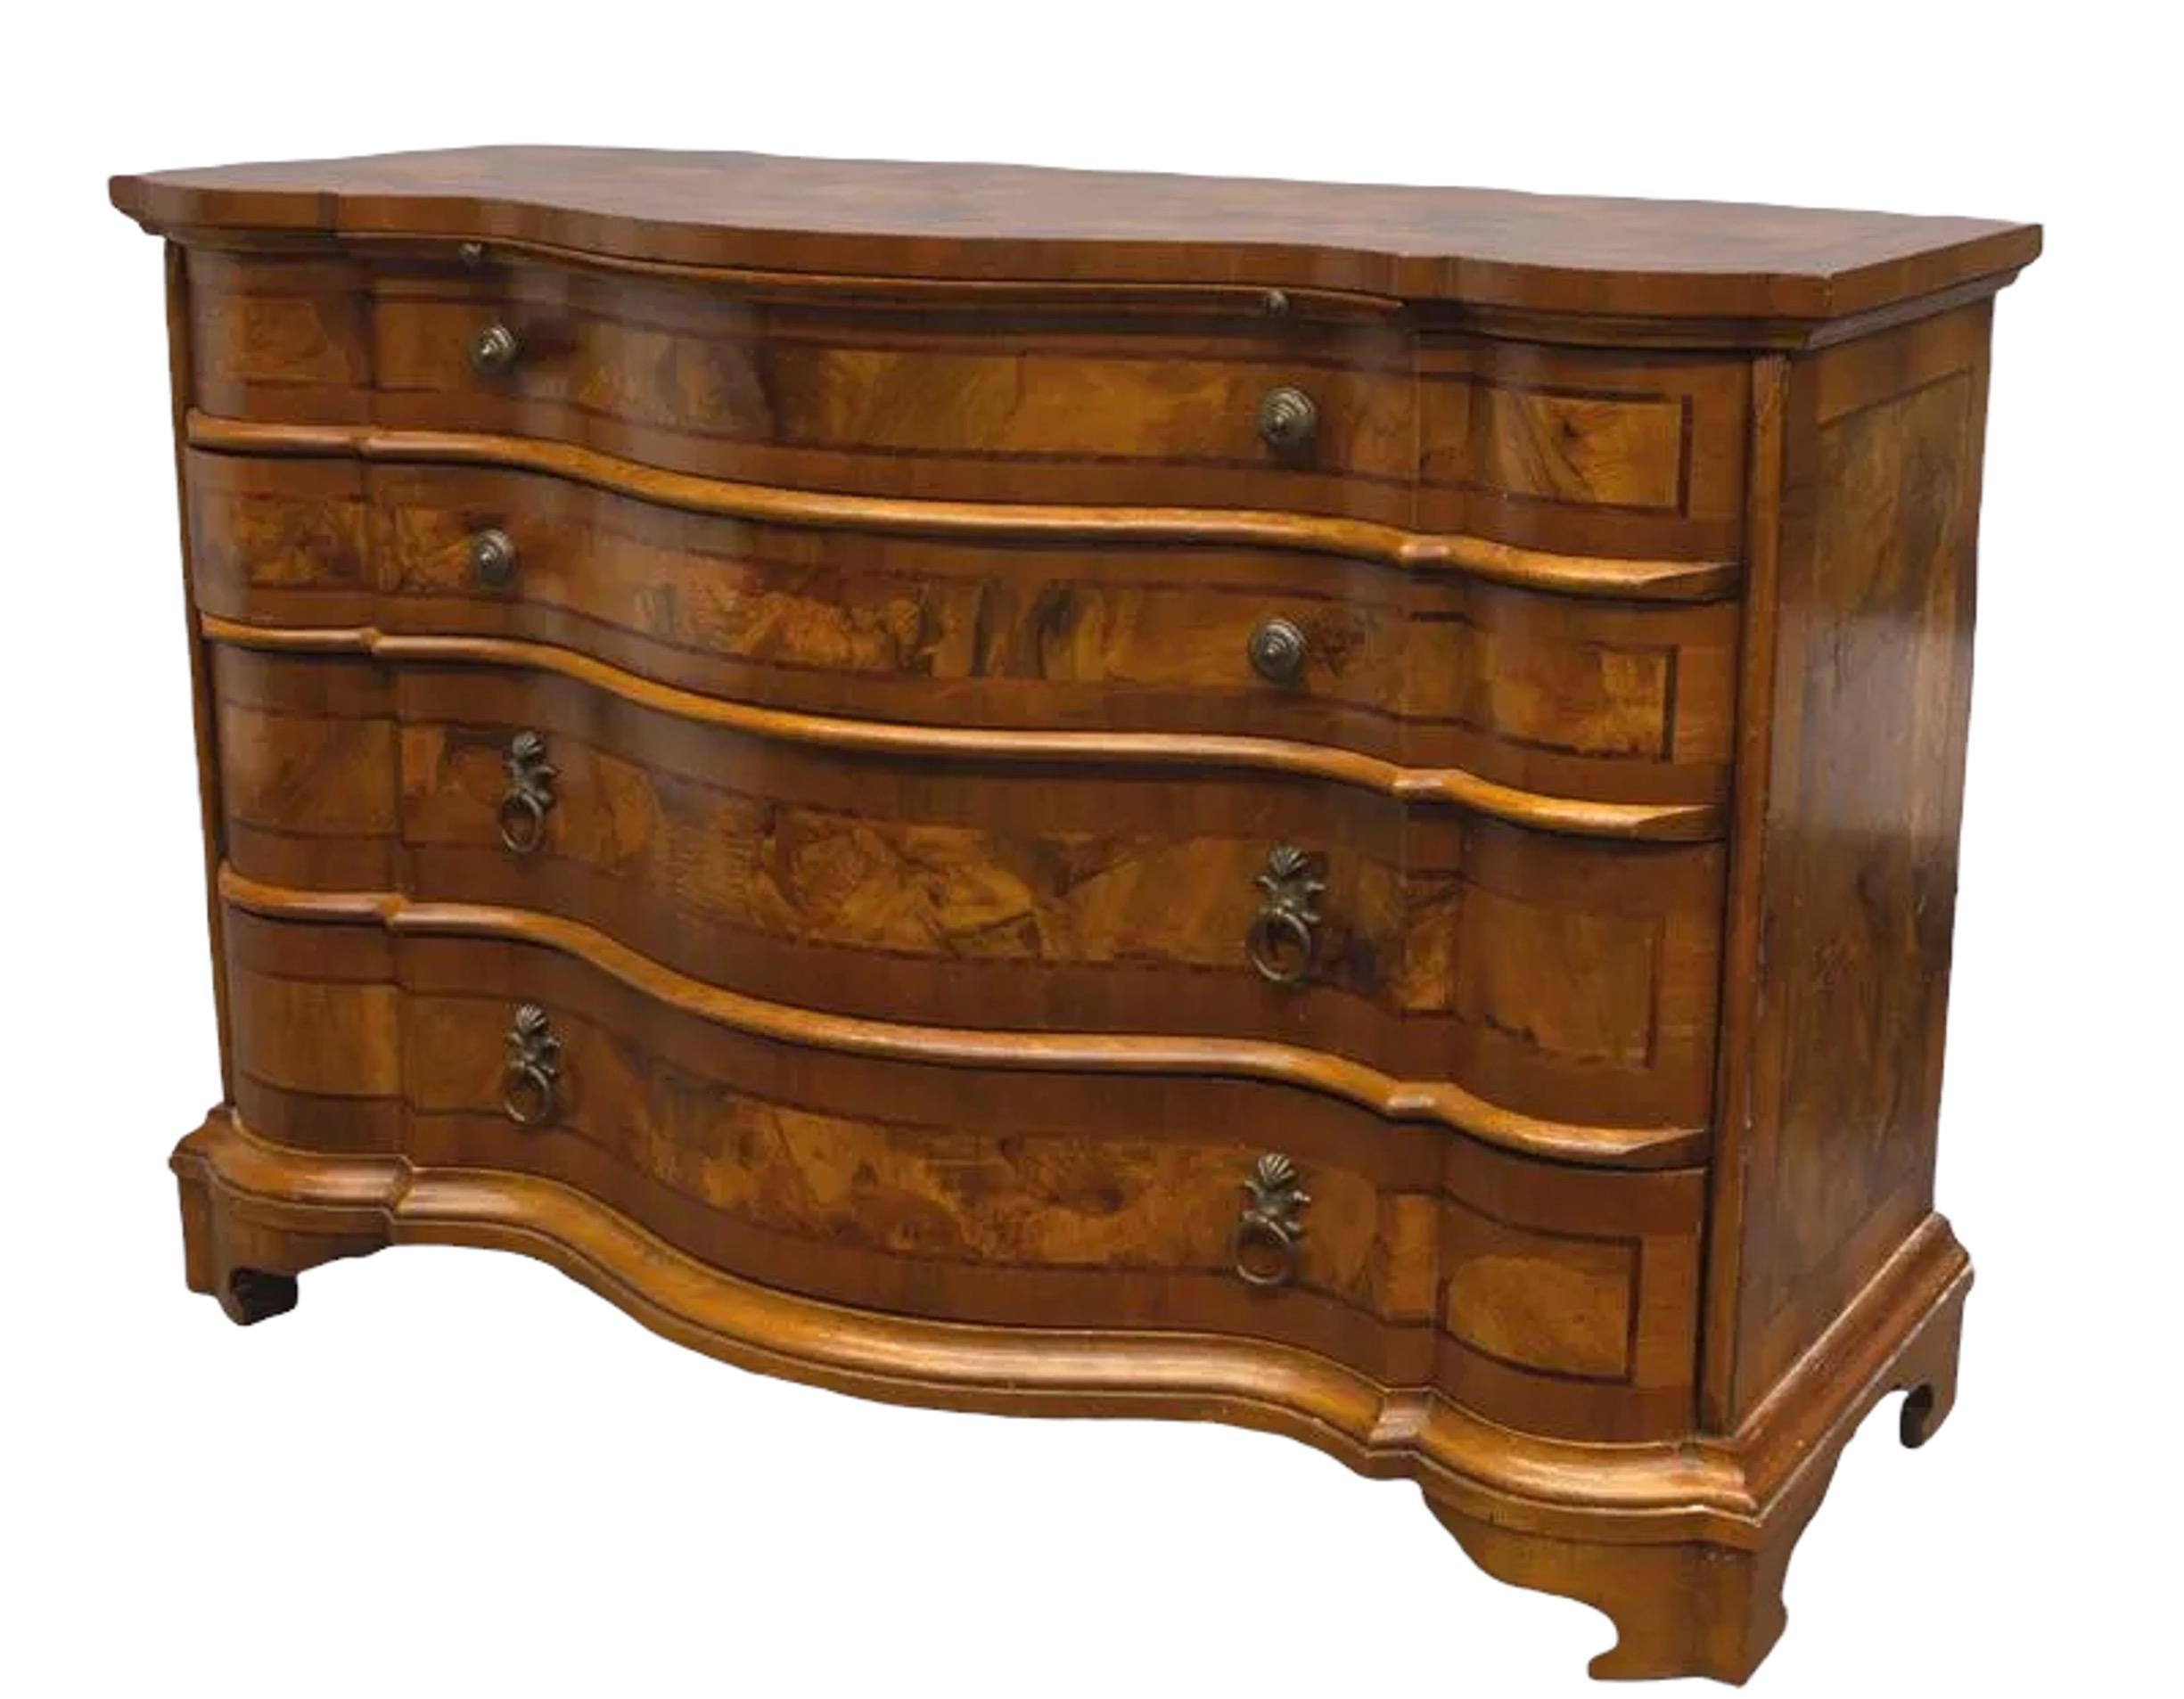 Hand-Carved Circa 1750s German Oxbow Shaped Walnut Commode For Sale